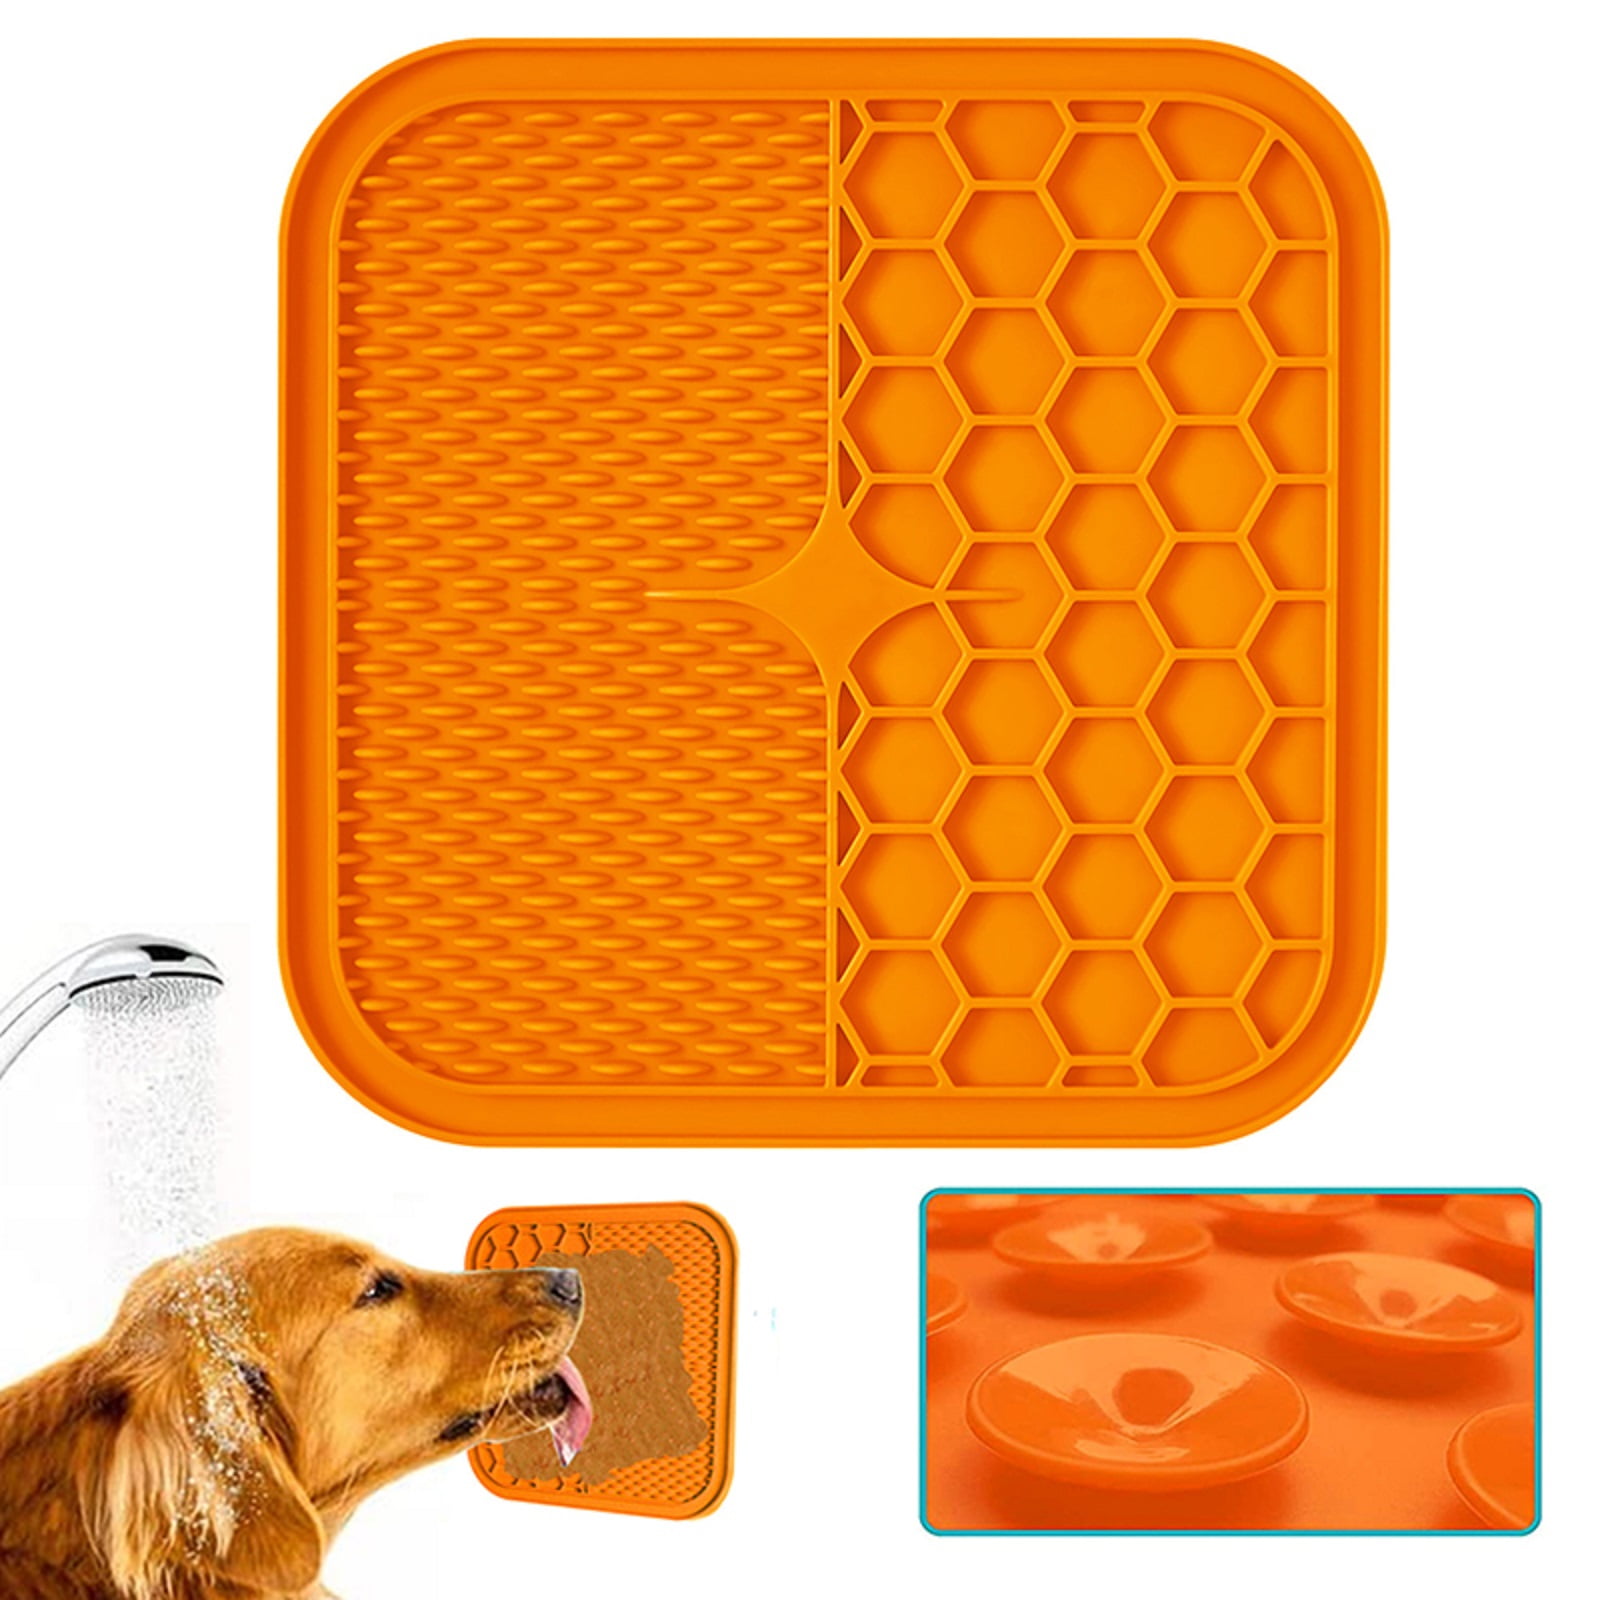 Spencer Paws Licking Mat for Dogs and Cats, Dog Slow Feeder Pat Dog Interactive Mat for Boredom Reducer, Calming Anxiety, Size: 19, Blue